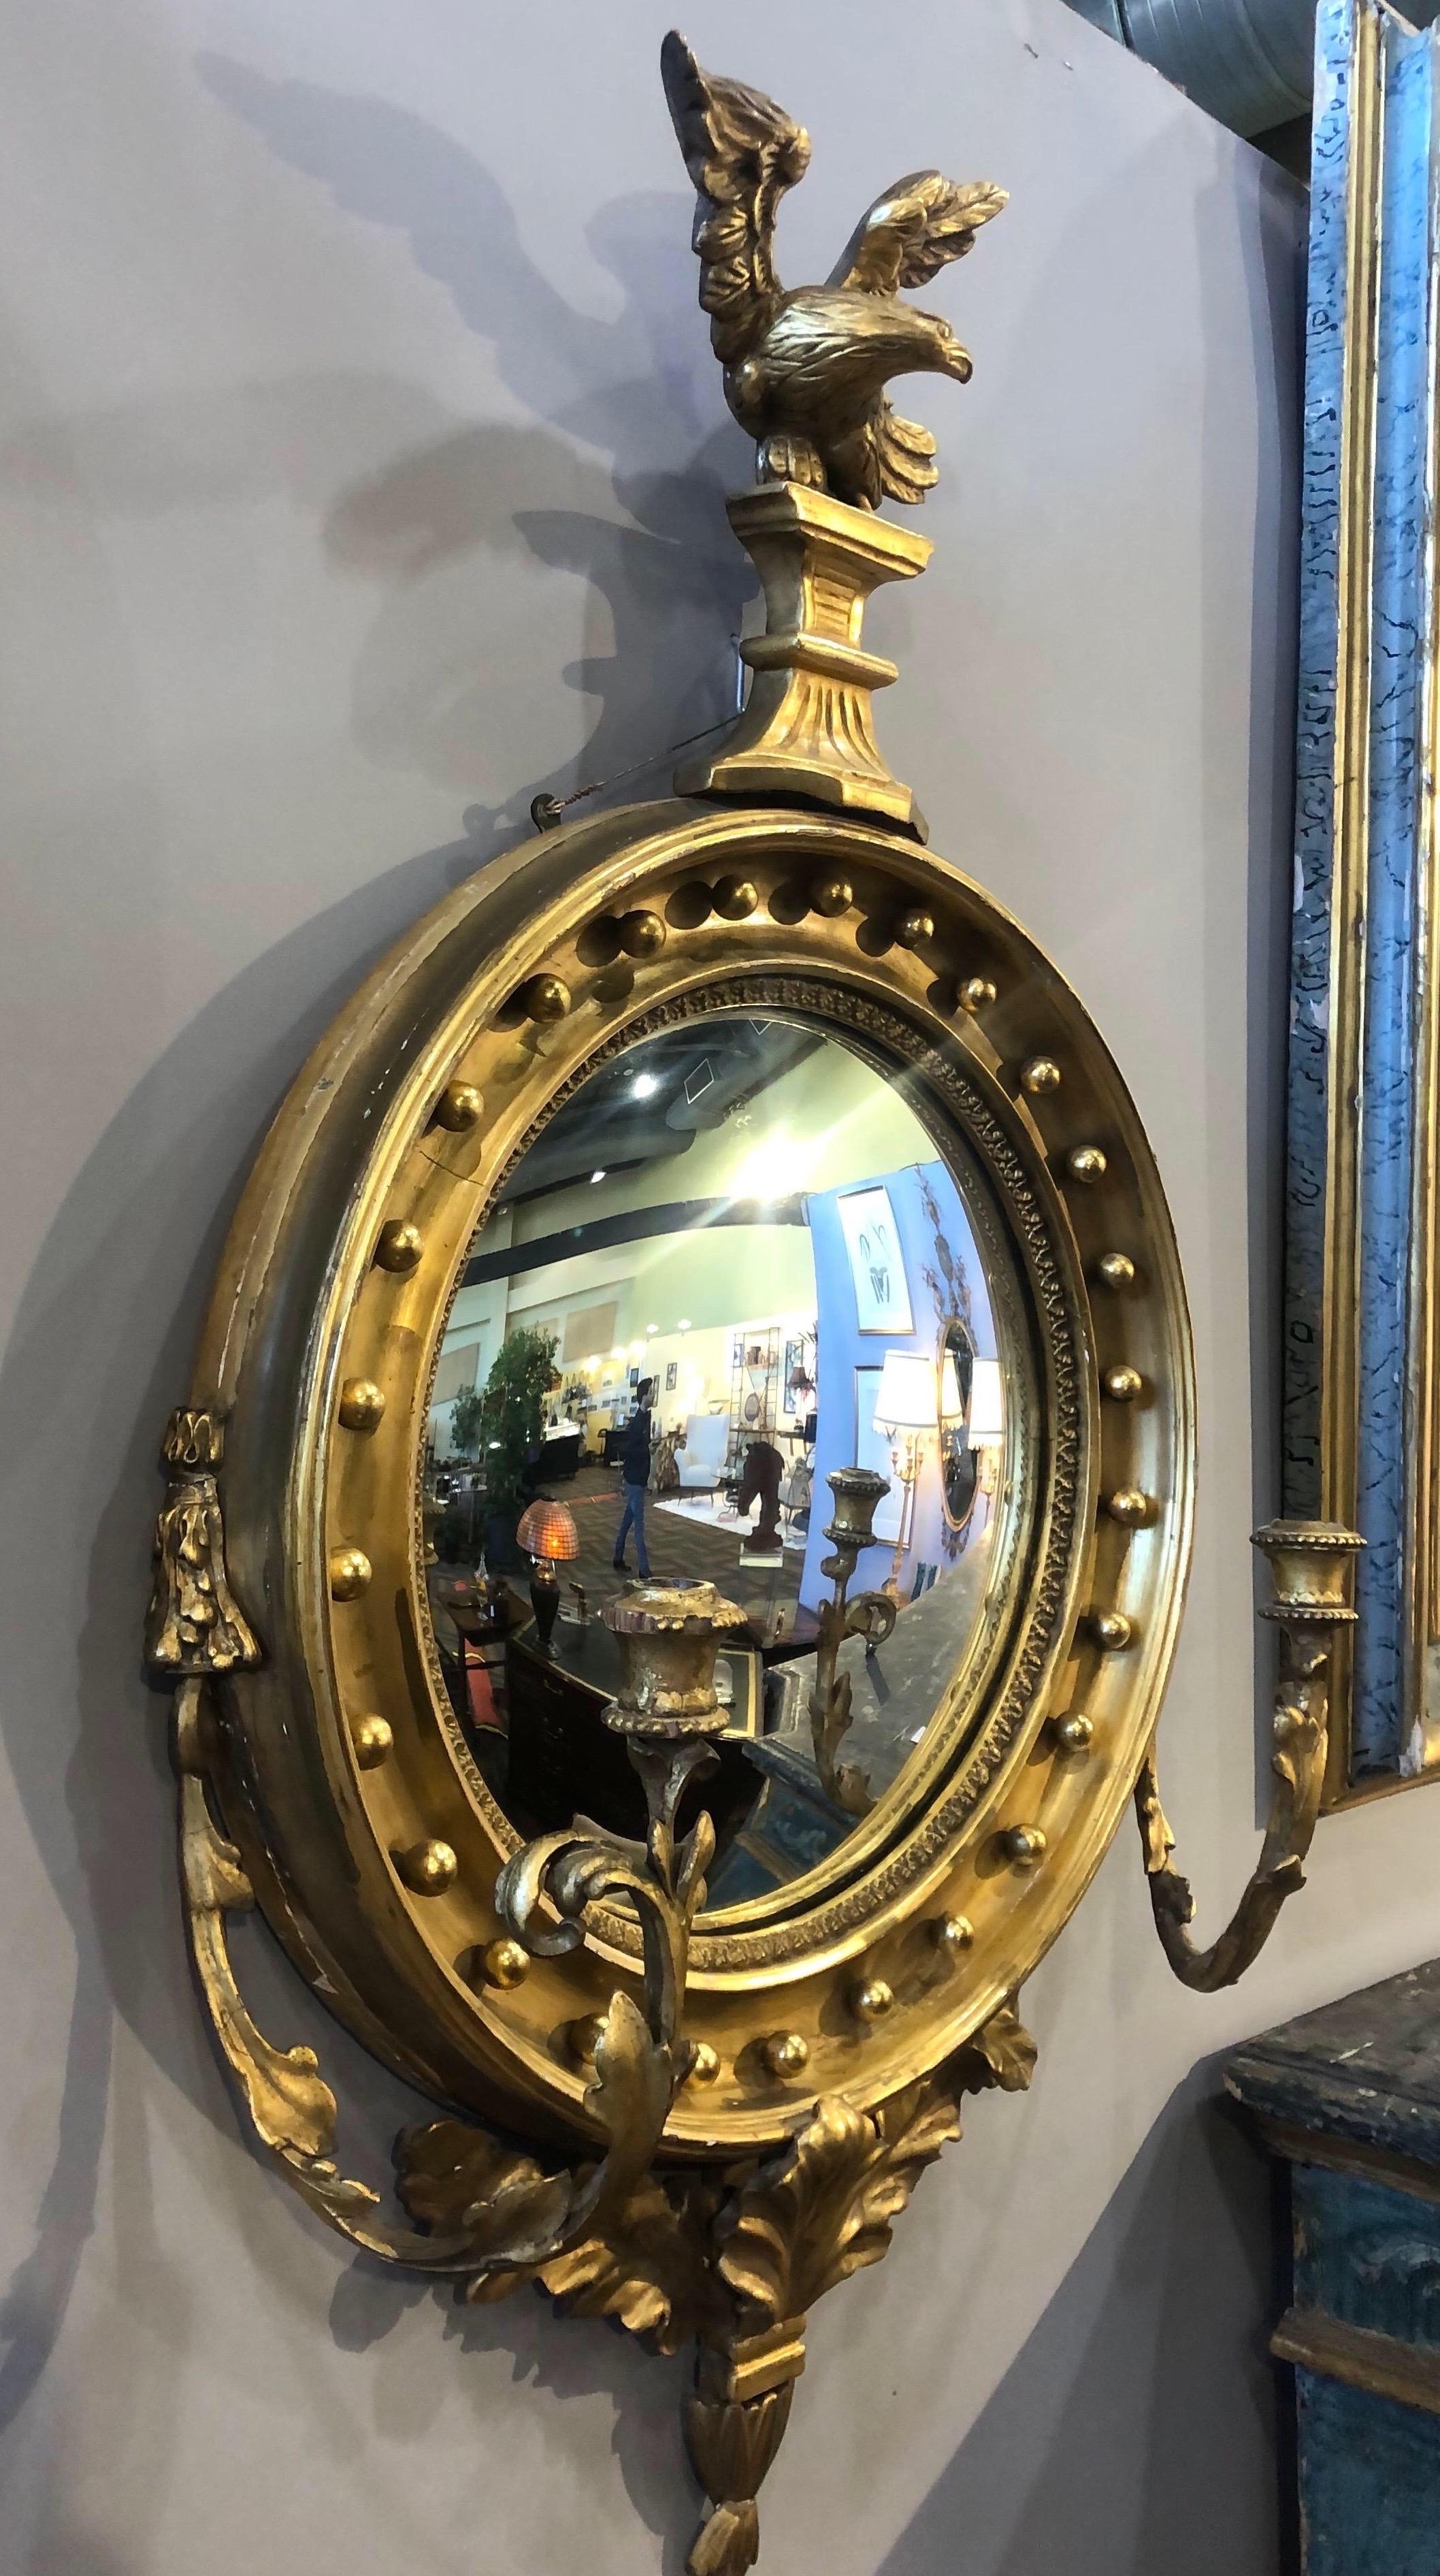 Beautiful English convex mirror with girandole arms. Mirror i topped with a carved eagle and resting on leaf and floral carvings. 

Label on back indicating it was sold in Dover, England.